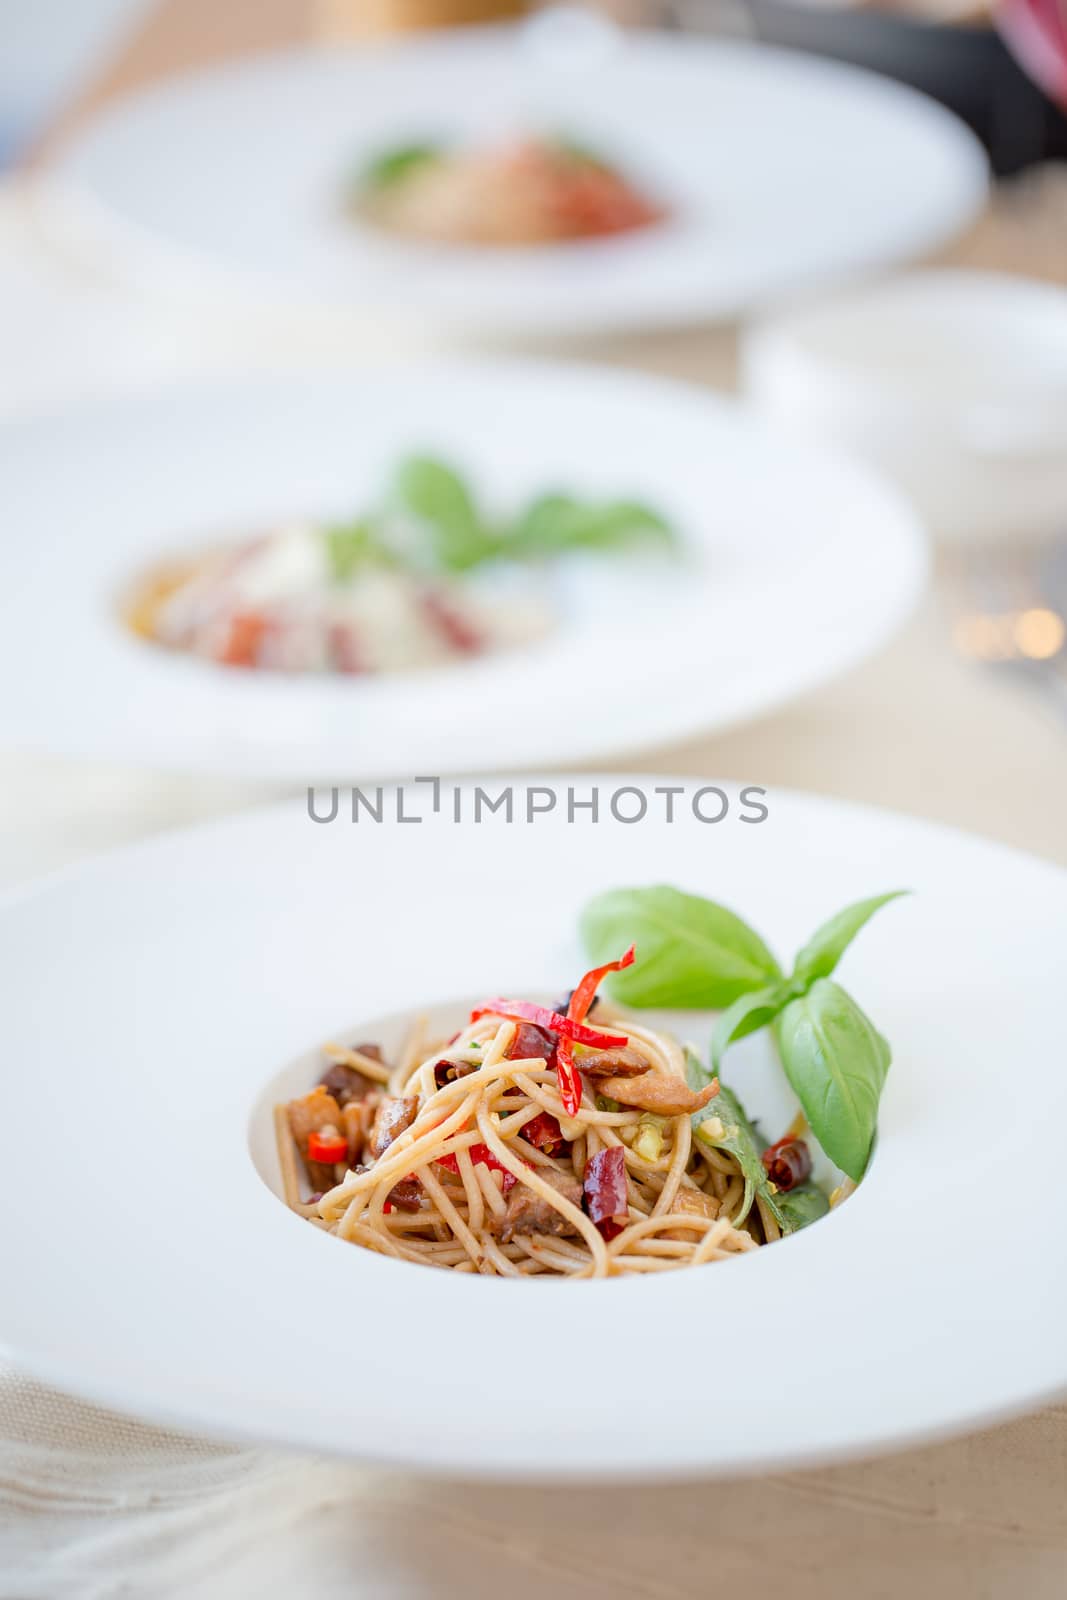 Spaghetti with Thai-style sauce with clams and chilli by kaiskynet